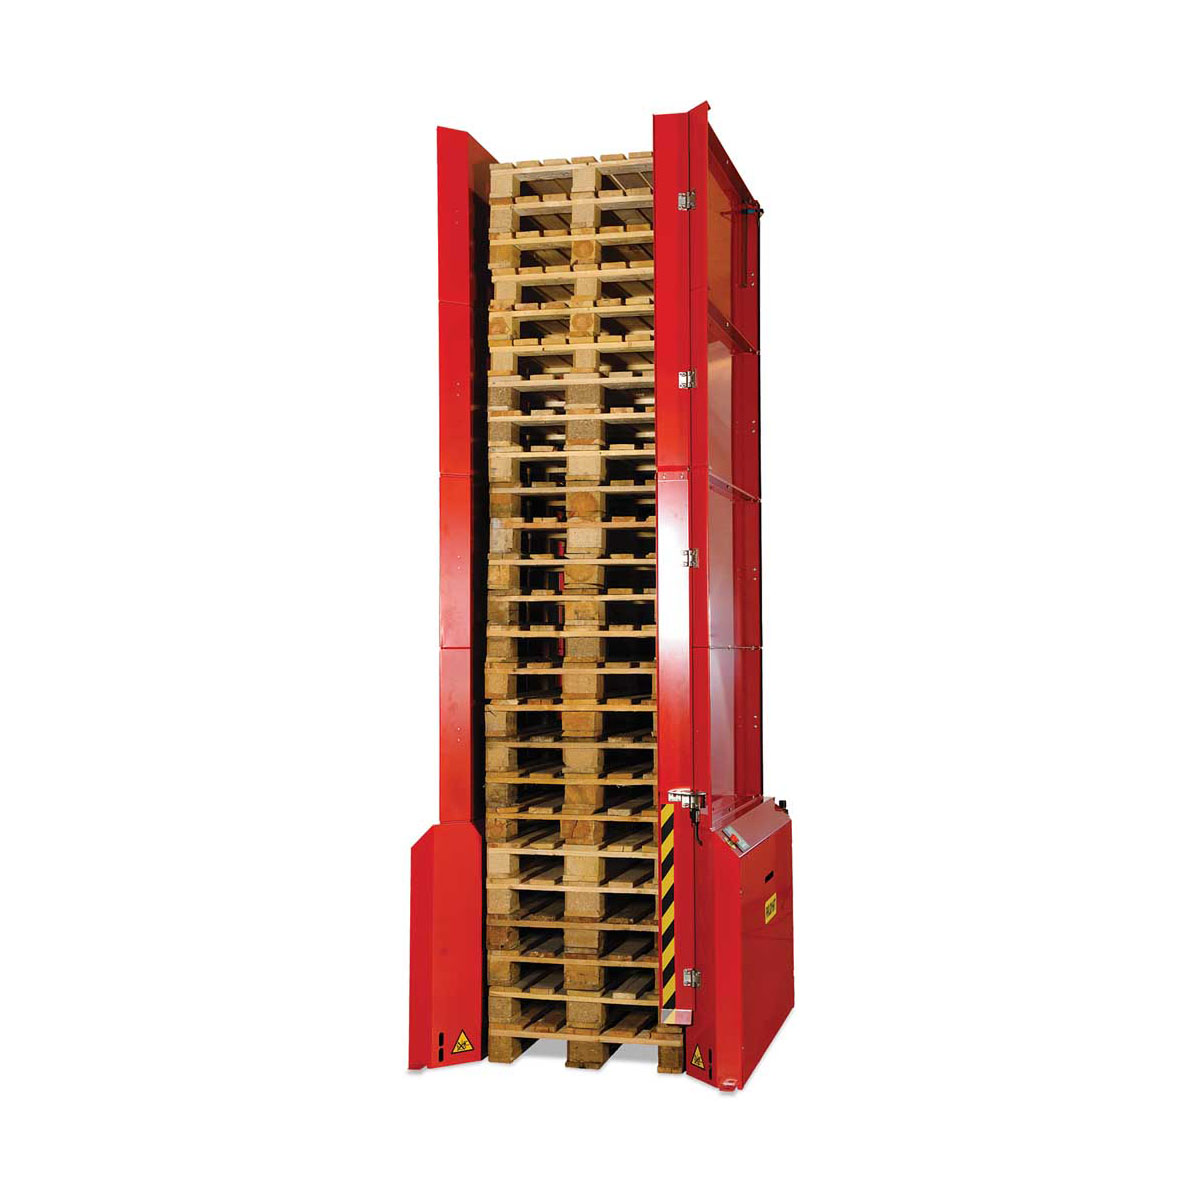 Buy Standard Air Pallet Dispensers in Pallet Dispenser from Palomat available at Astrolift NZ